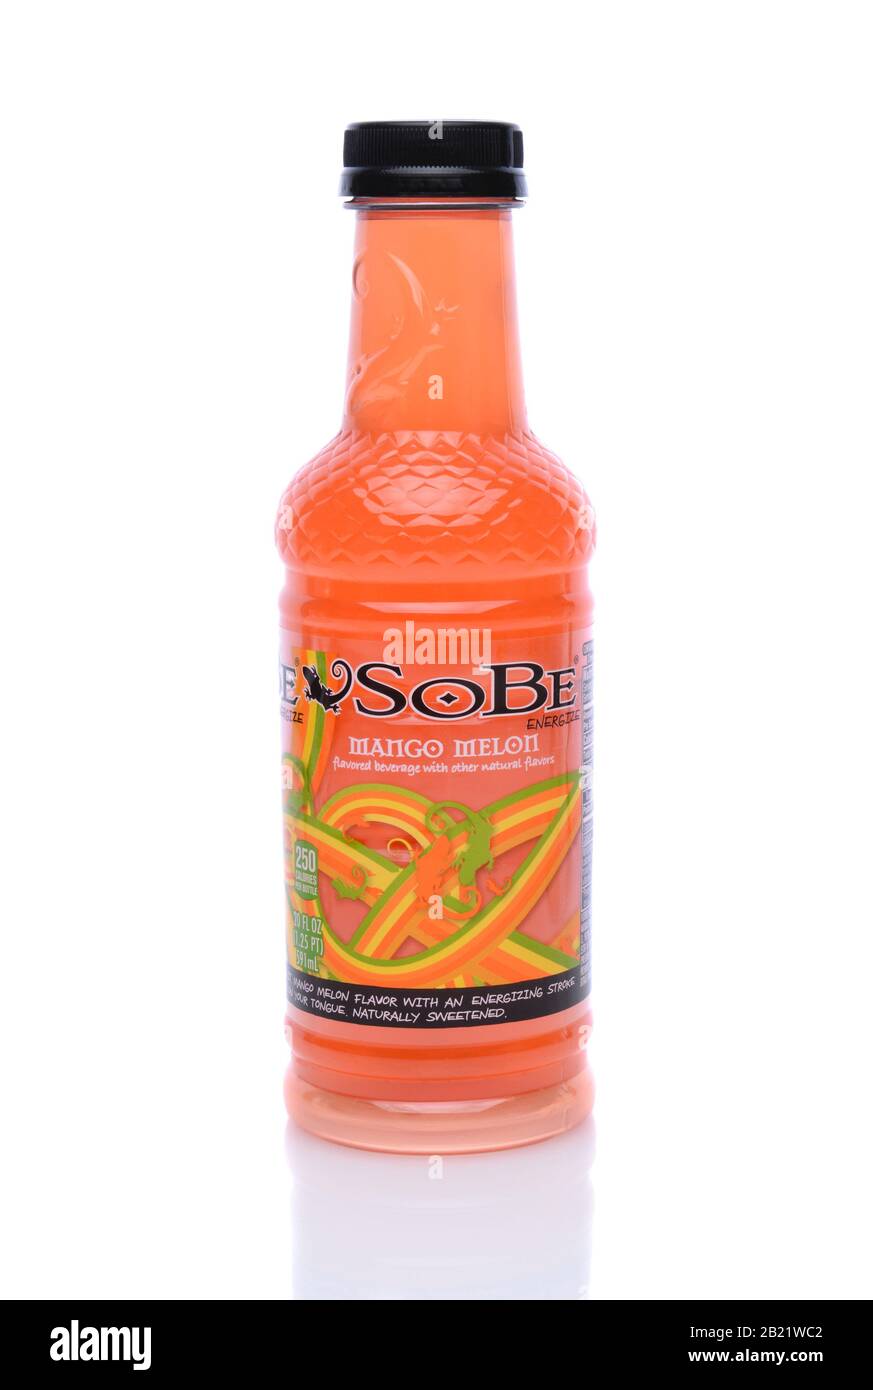 IRVINE, CA - MAY 14, 2014: A Bottle of SoBe Mango Melon Drink  The name SoBe is an abbreviation of South Beach, named after the upscale area of Miami Stock Photo